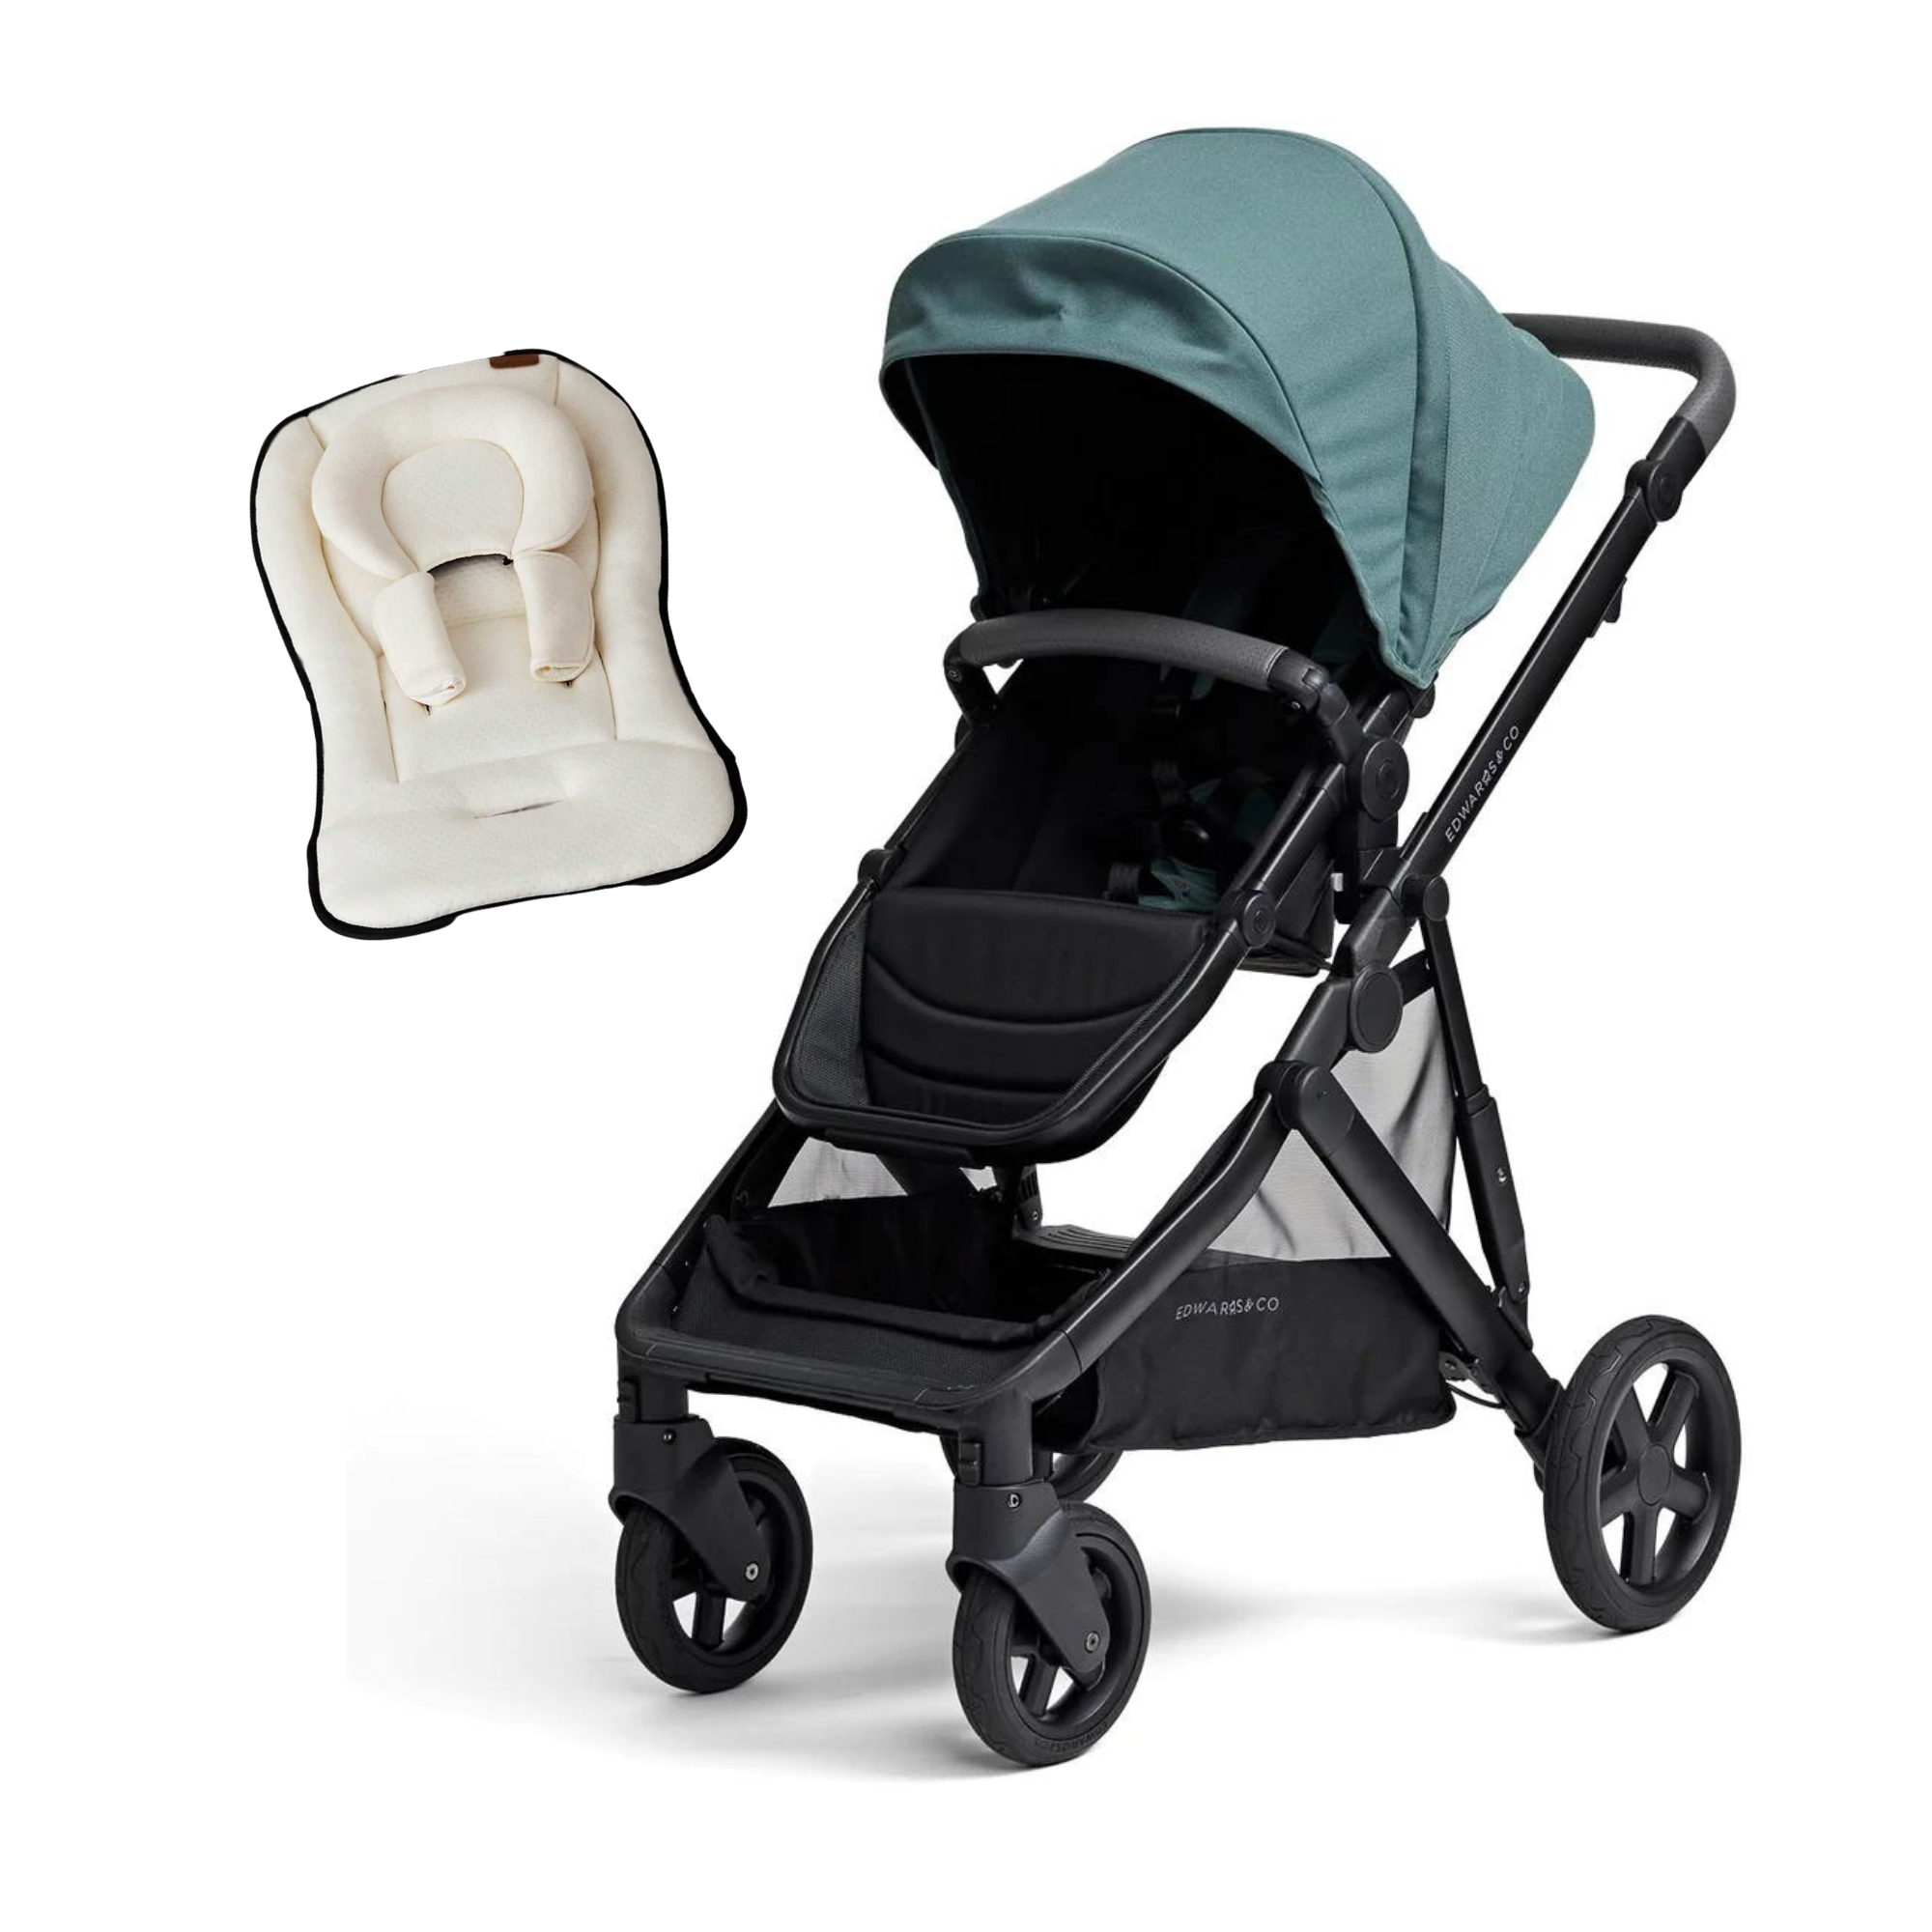 Edwards & Co Olive Stroller FREE Infant Insert (sale ends 21/6) - Tiny Tots Baby Store 